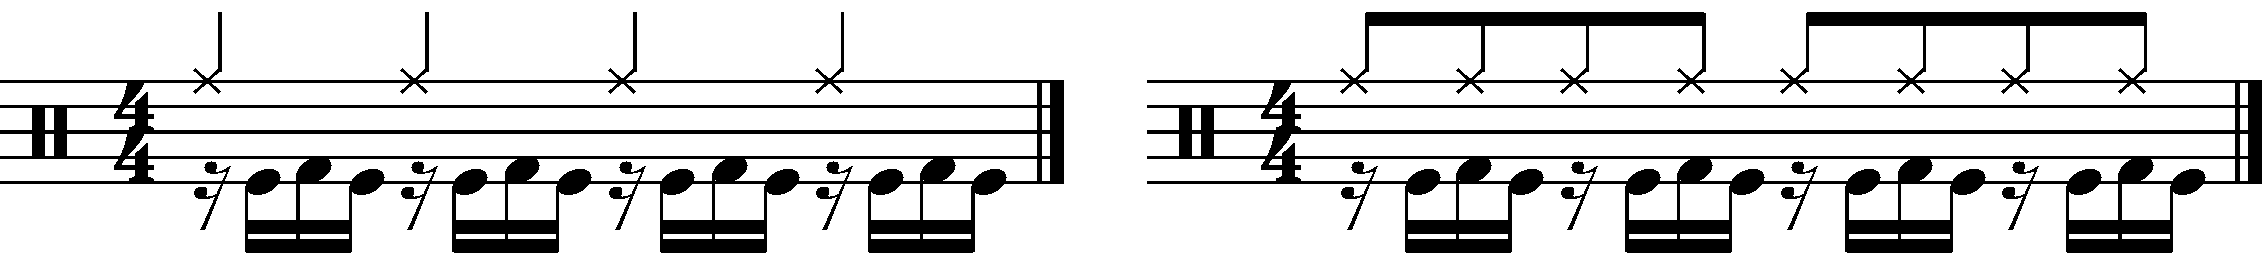 Developing double kick grooves using a e+a rhythm.